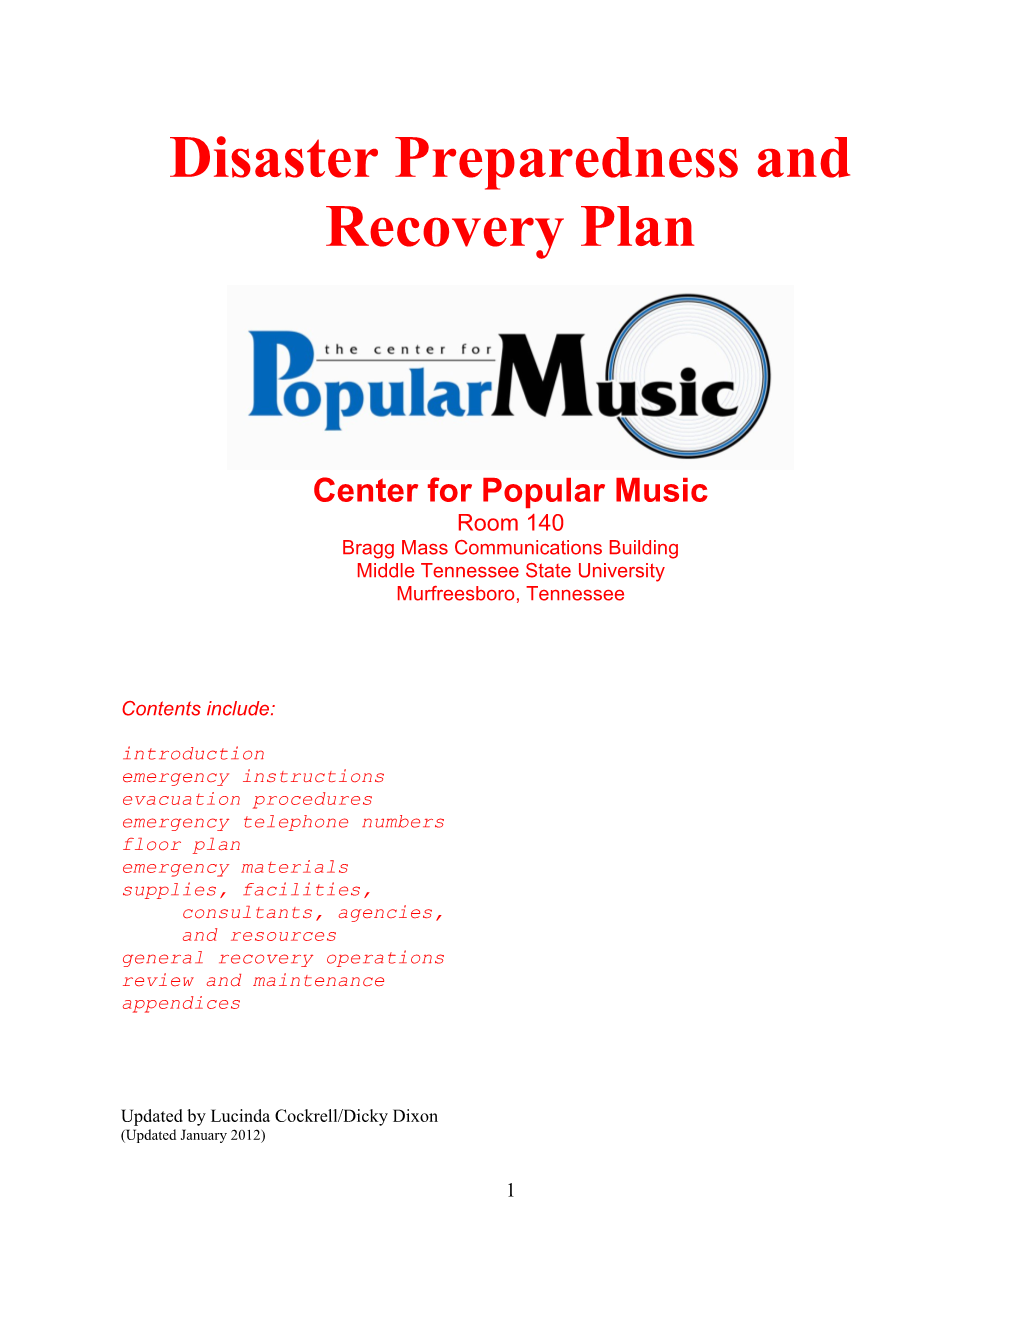 Disaster Preparedness and Recovery Plan